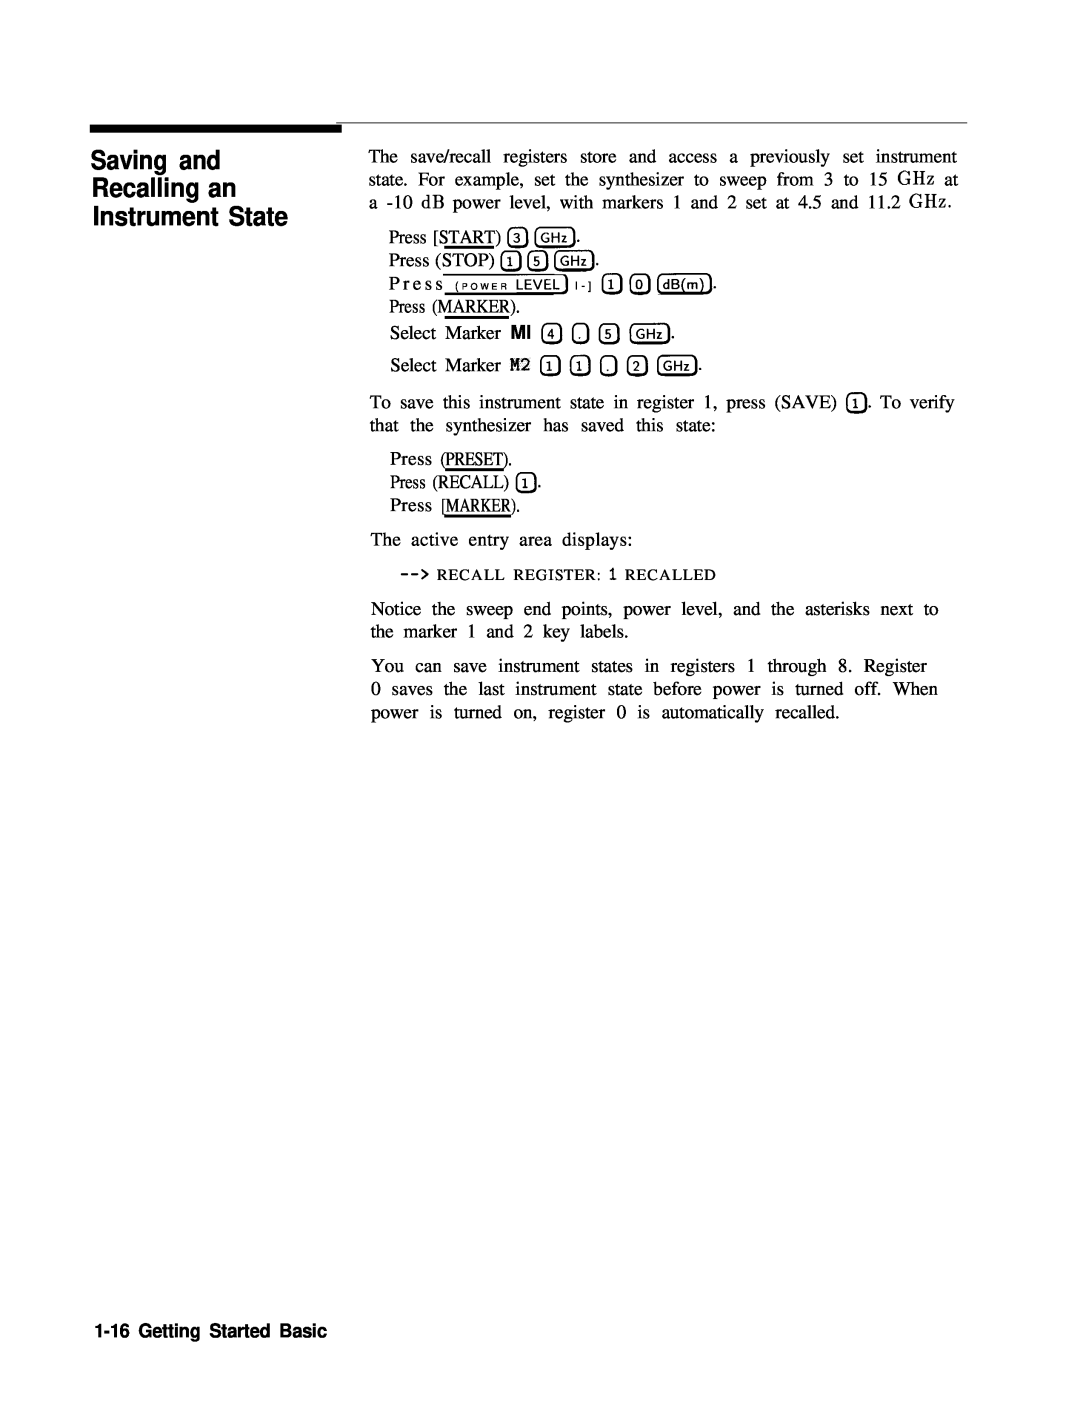 HP 24A, 83620A, 22A manual Saving and Recalling an Instrument State, Getting Started Basic 